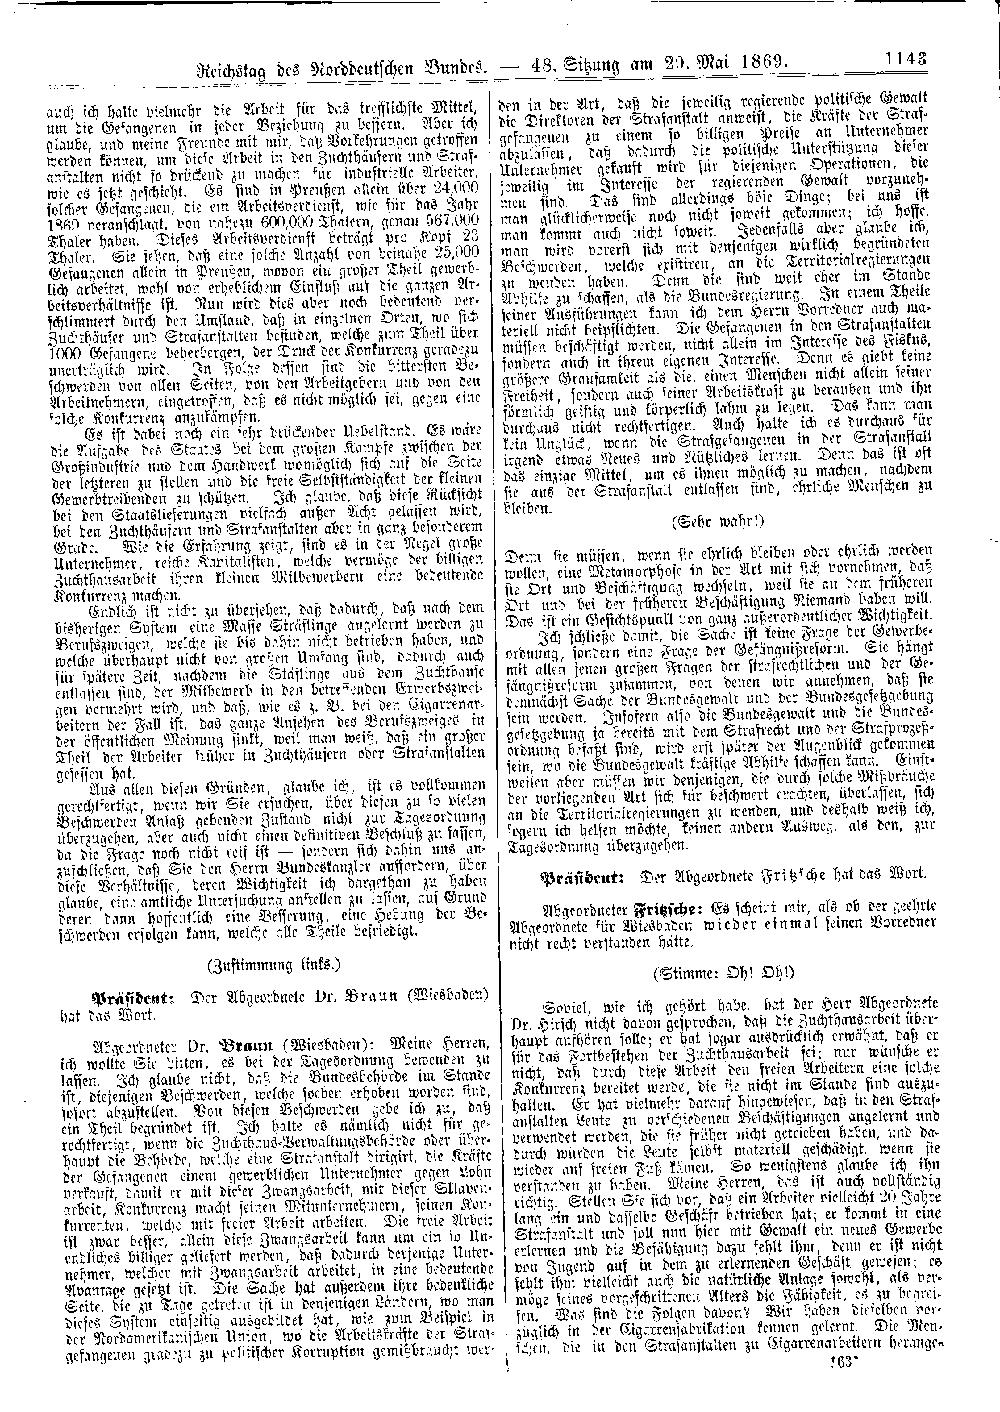 Scan of page 1143